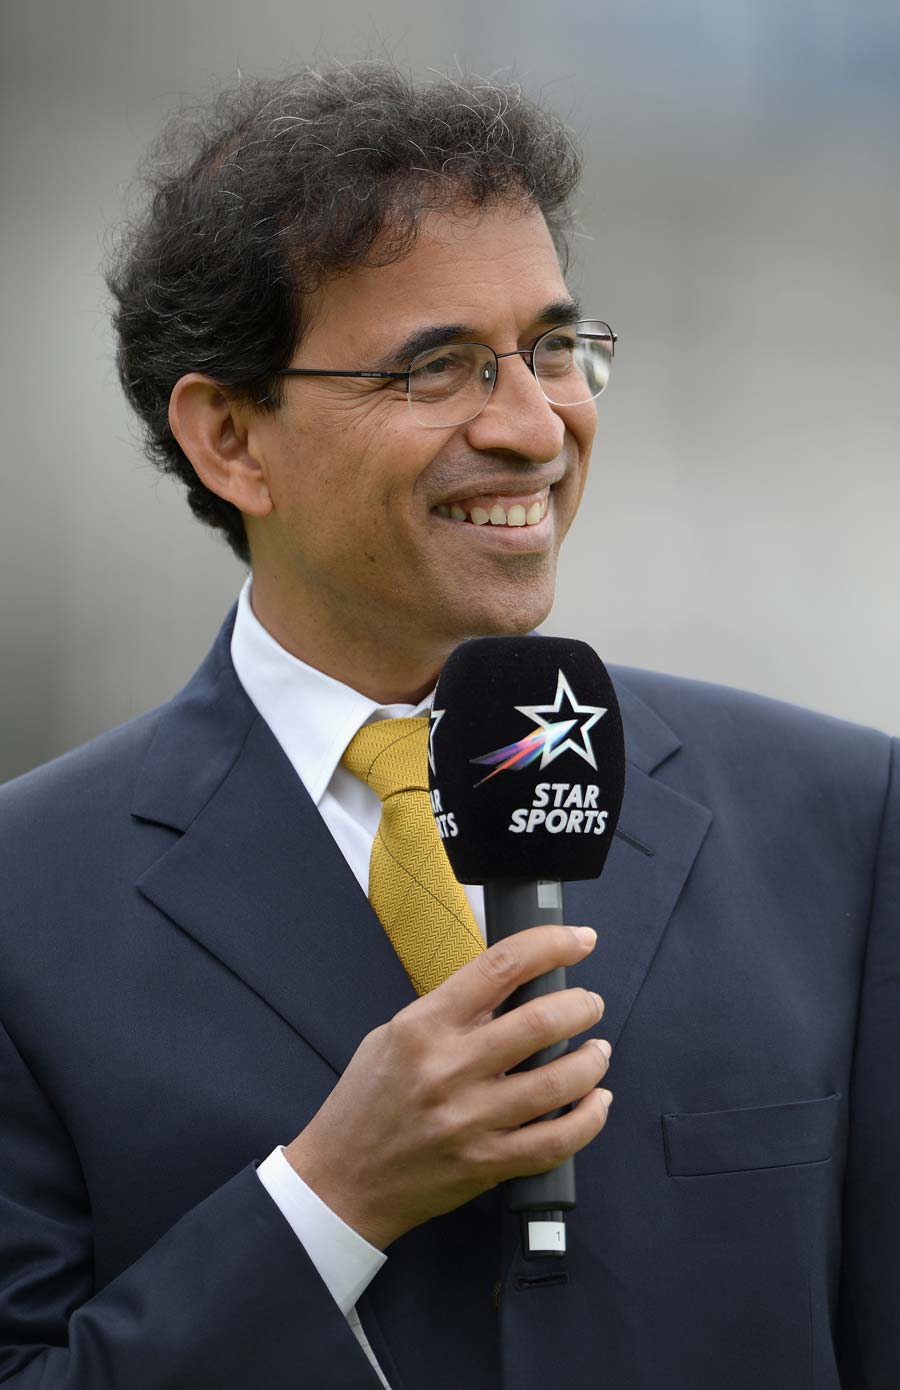 Harsha Bhogle: “On average, he has bowled on middle stump,” quipped Bhogle after South Africa’s Marco Jansen bowled extravagant wides on both sides of the wicket against India at the Eden Gardens. When it comes to instant wit in cricket, Bhogle is still in a league of his own. His ability to shift between anchor, play-by-play commentator and expert across TV and digital platforms like Cricbuzz means his versatility is almost unmatched. As expected, Bhogle did justice to Virat Kohli’s record-setting 50th ODI century in Mumbai with characteristic elegance without puncturing the theatrical beauty of Kohli’s own celebrations